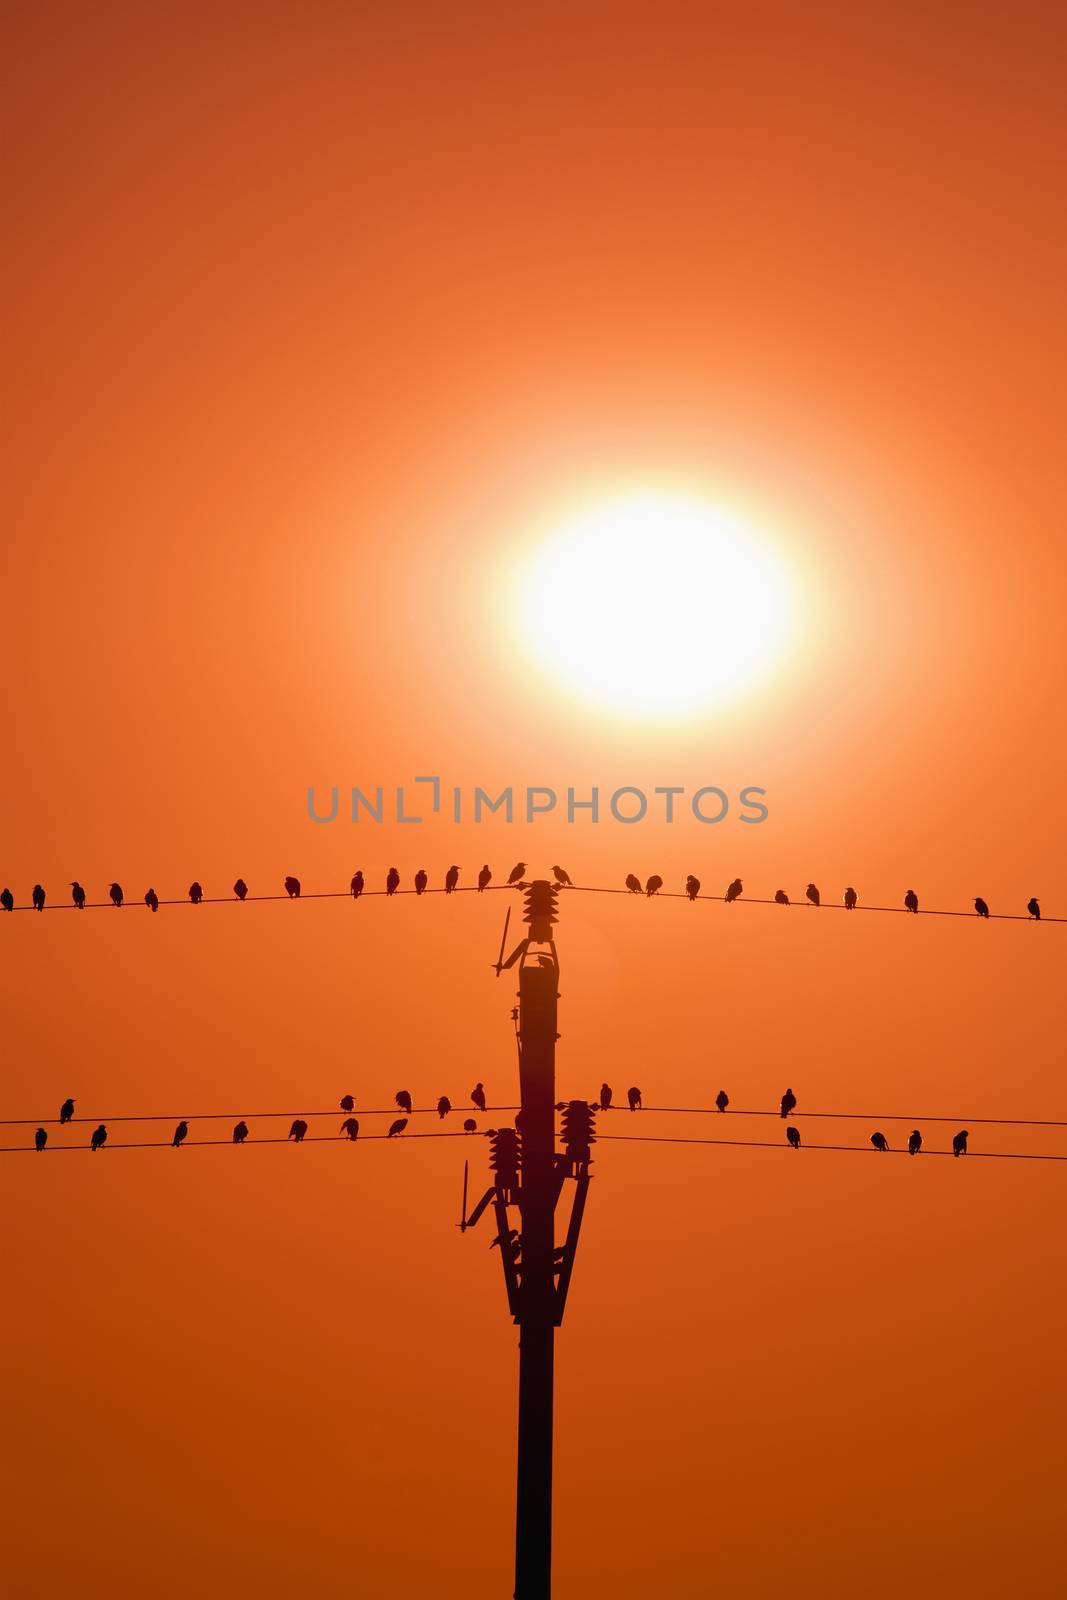 birds sitting on wires in sunset